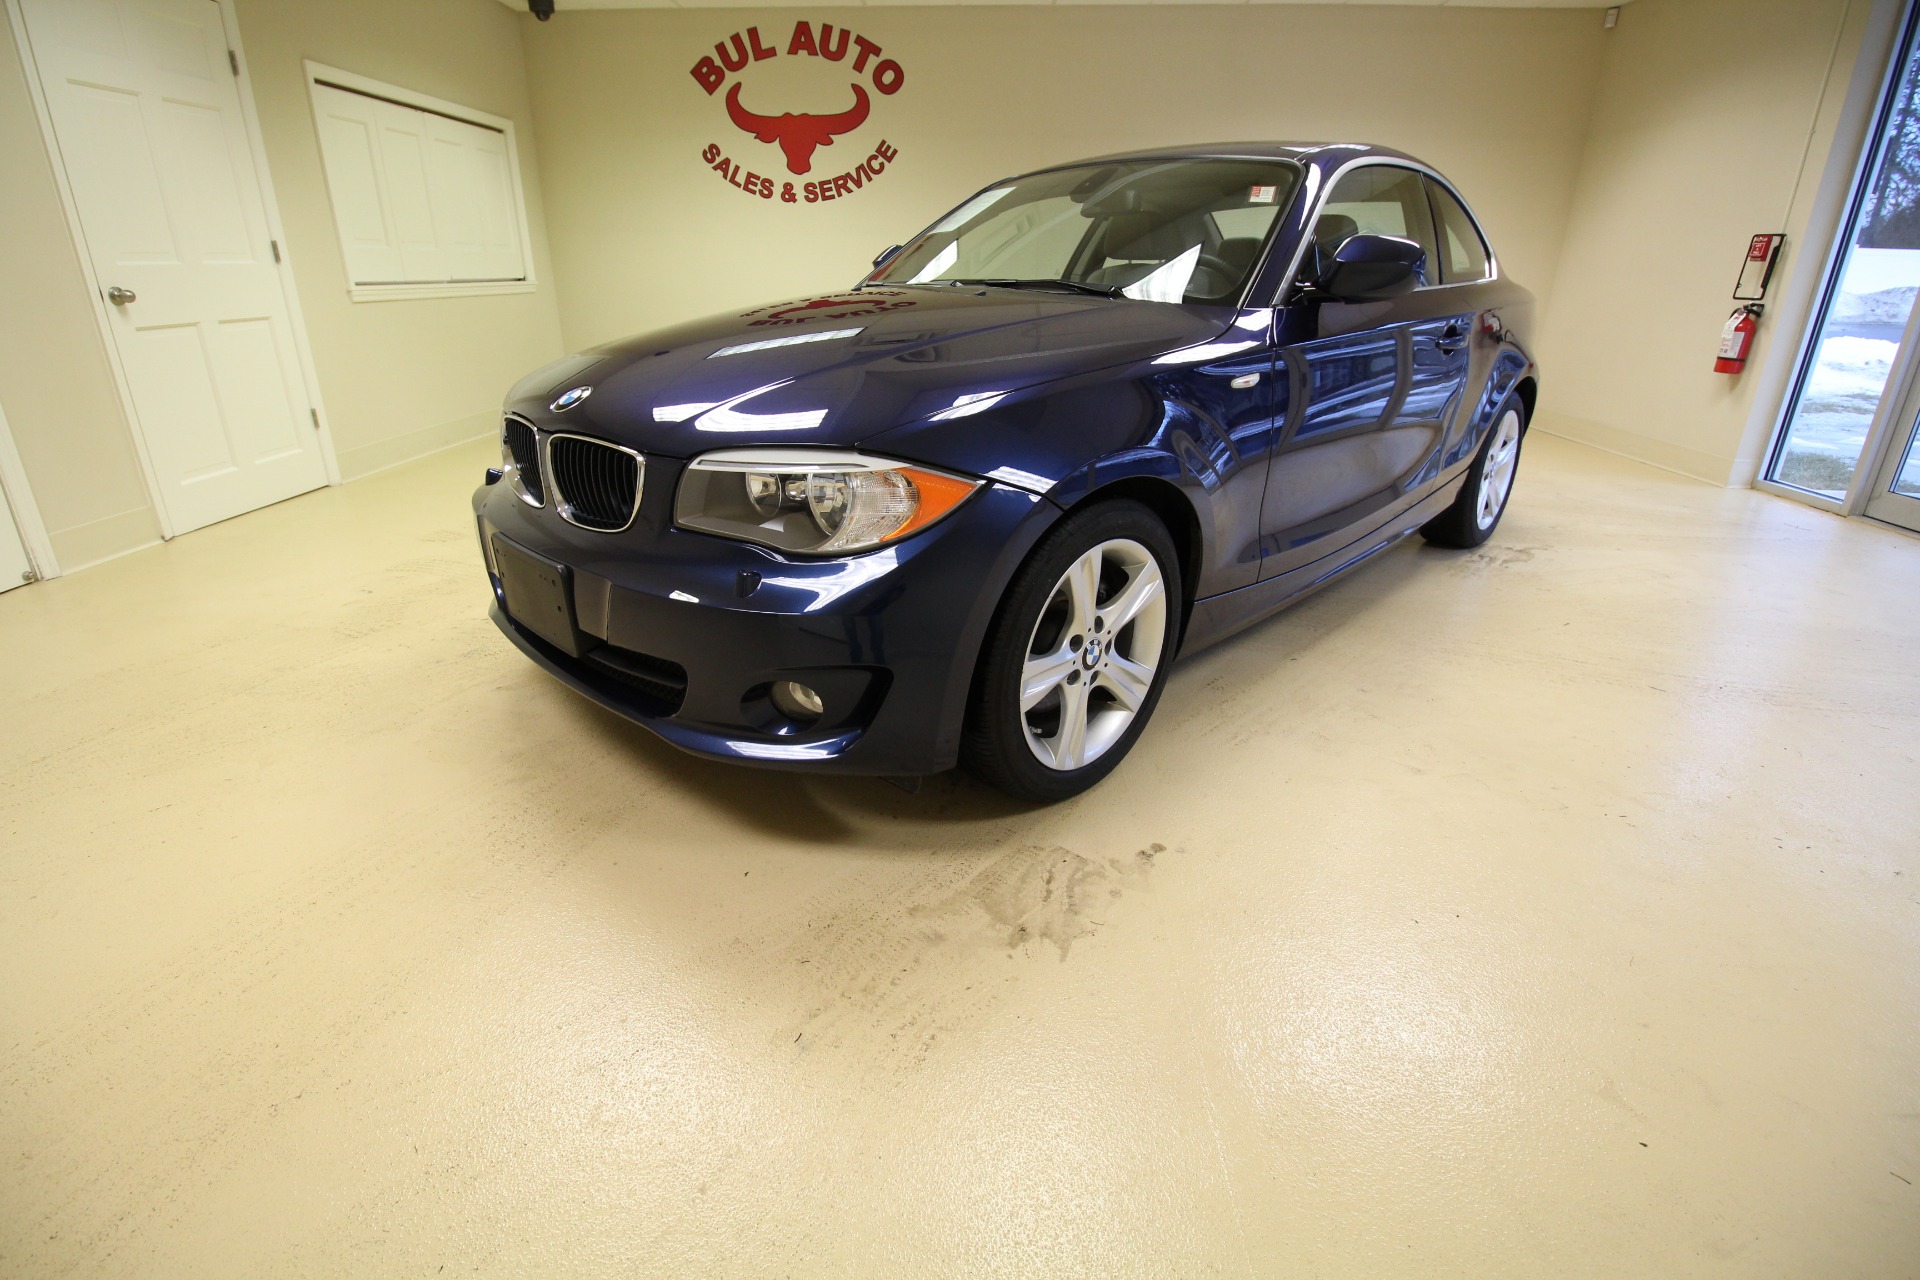 13 Bmw 1 Series 128i Coupe Stock For Sale Near Albany Ny Ny Bmw Dealer For Sale In Albany Ny Bul Auto Sales